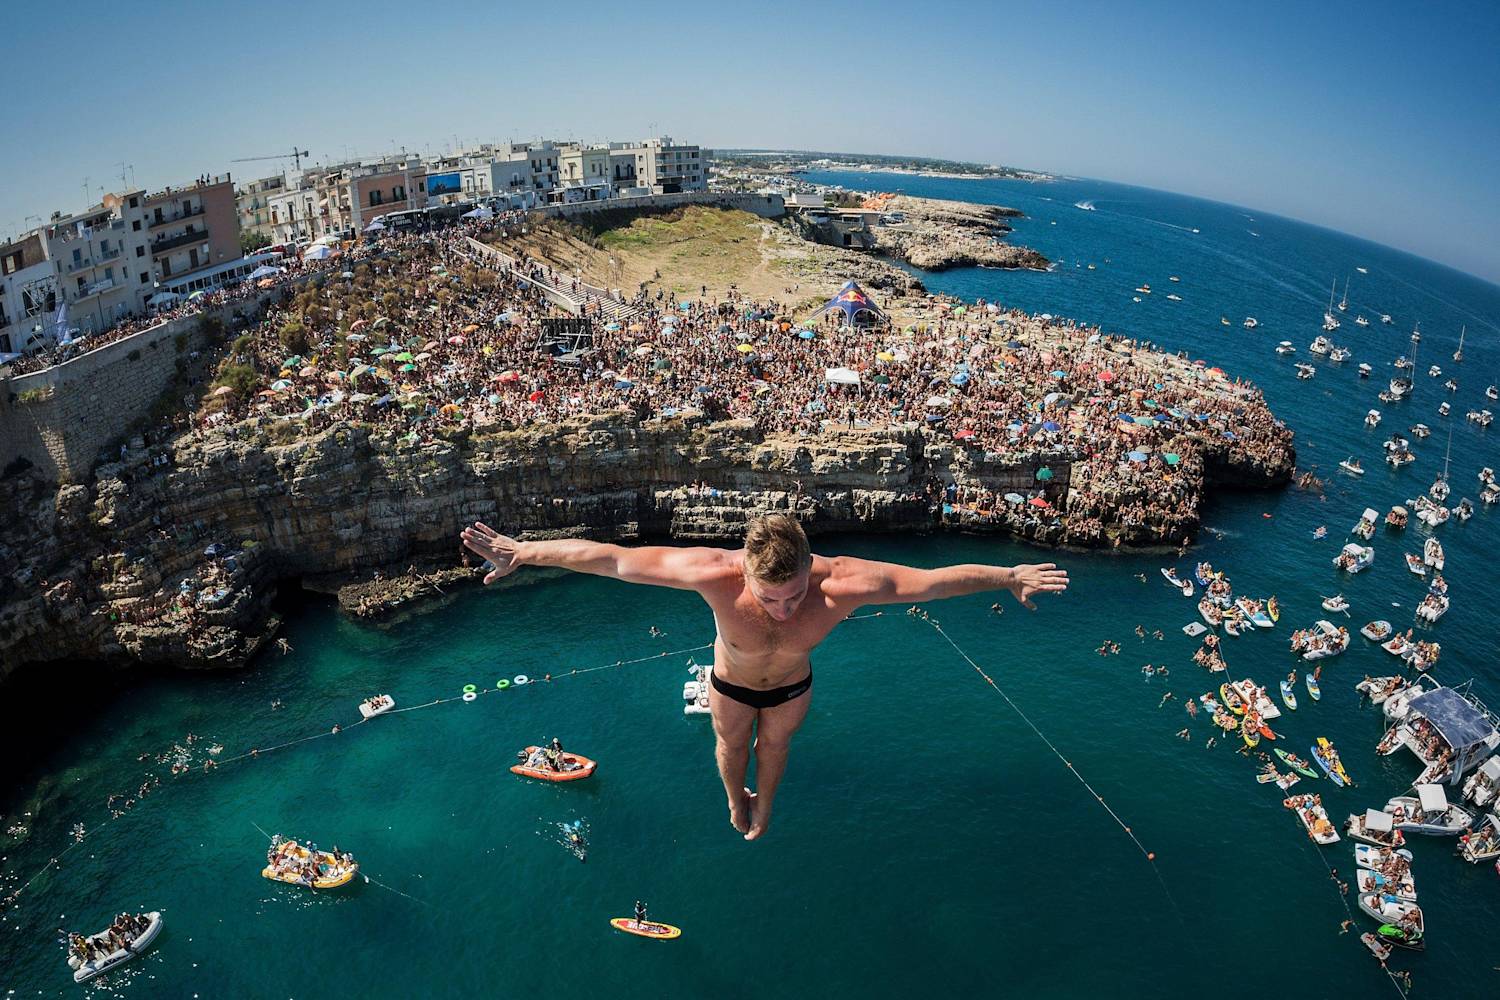 Red Bull Cliff Diving Italy 2018 ++Live Event Page++